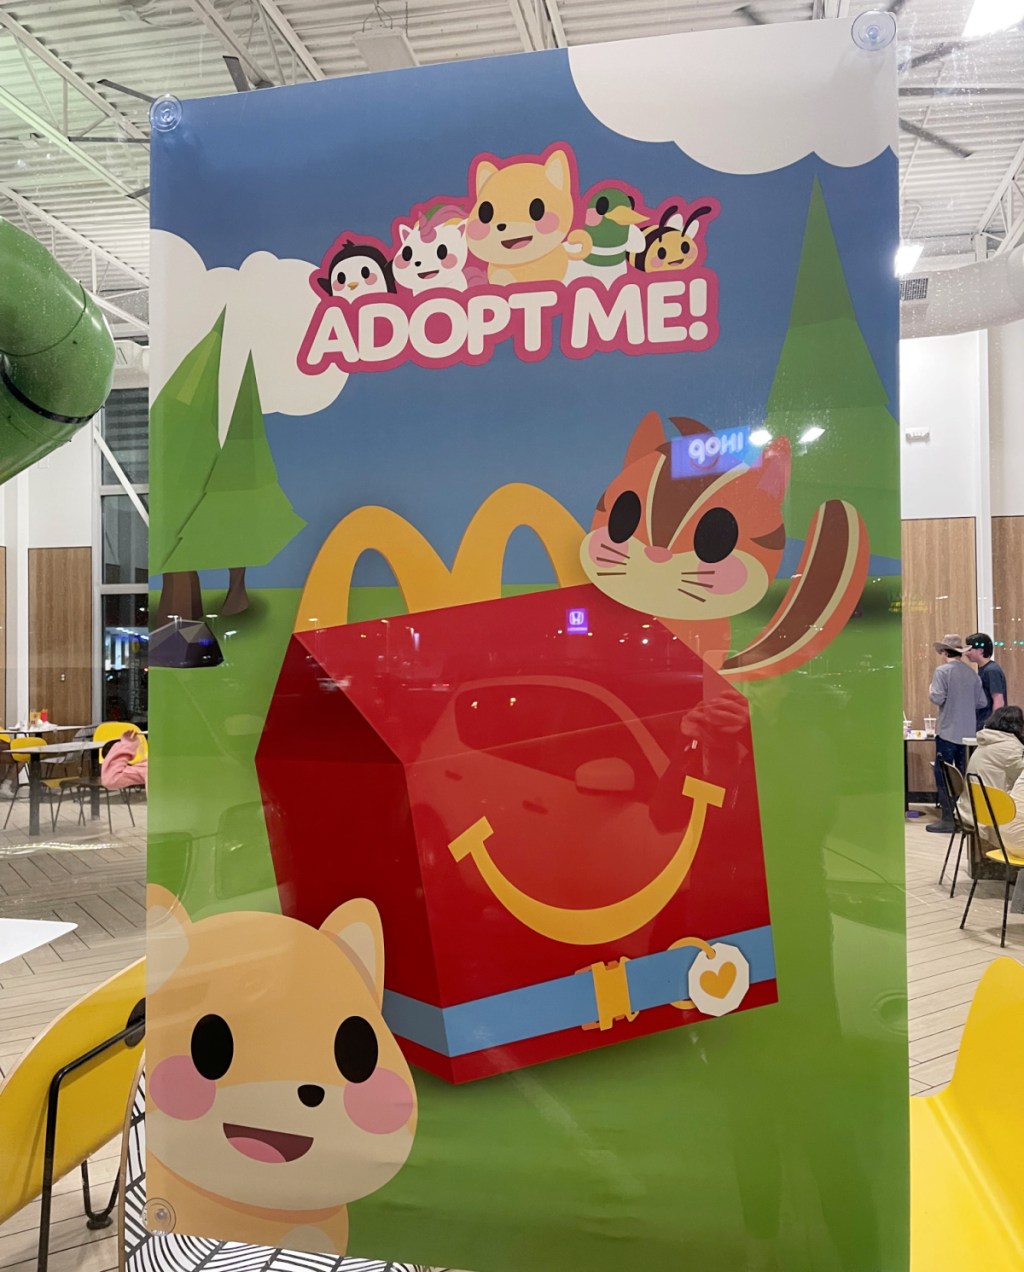 A sign in the McDonald's promotiing Adopt Me! Happy Meal Toys from the Roblox Game Adopt Me!